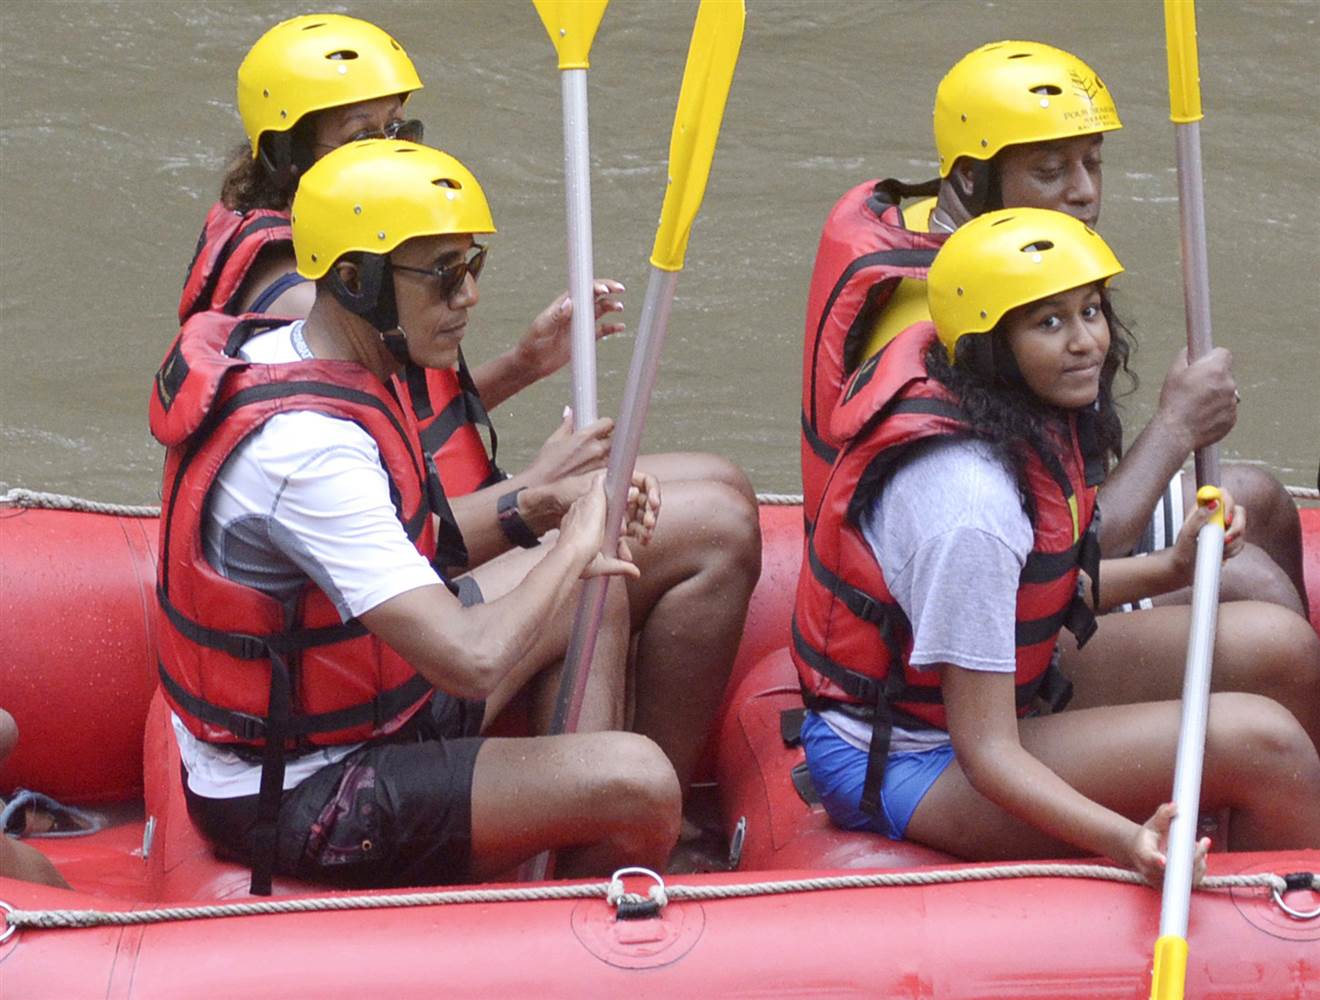 President Obama and family go river rafting in Indonesia | 3CHICSPOLITICO1320 x 1000